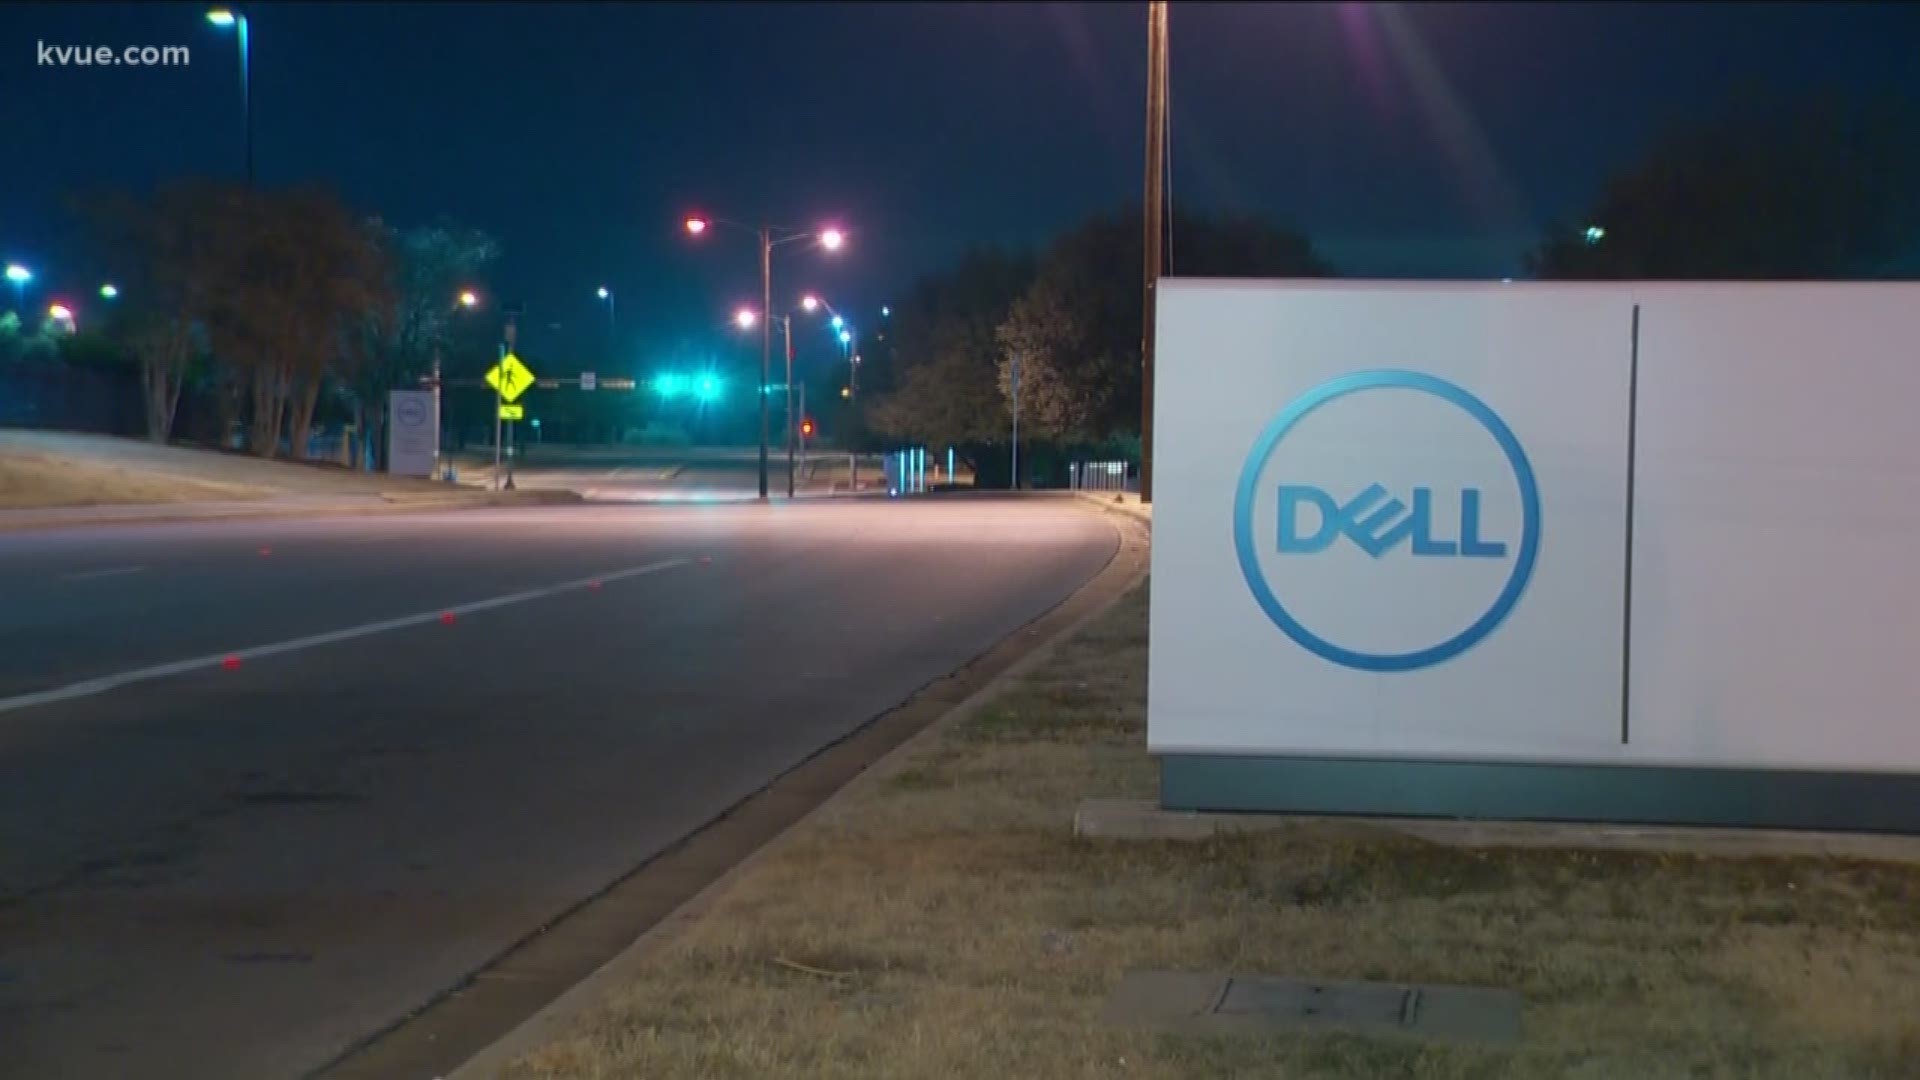 Under the agreement, Dell Technologies will pay $7 million in lost wages, interest and benefits, as well as "assuring all employees are afforded equal employment opp